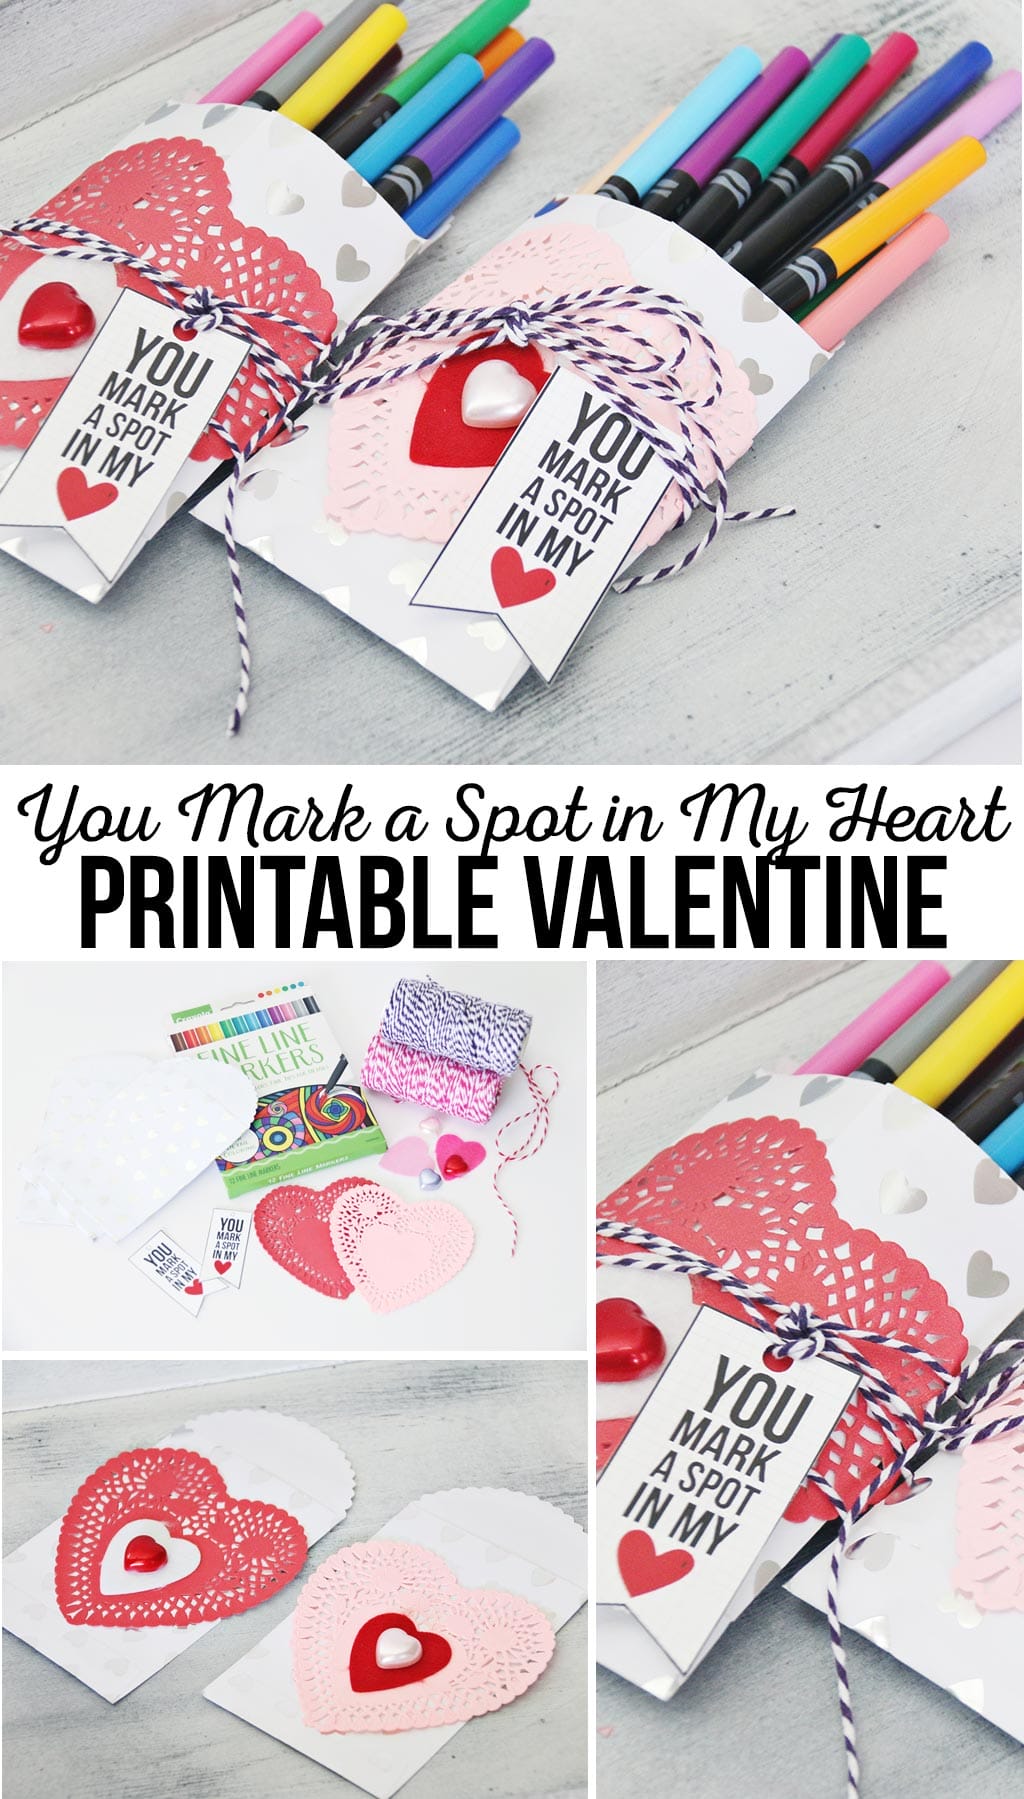 You Mark a Spot in my Heart Printable Valentine